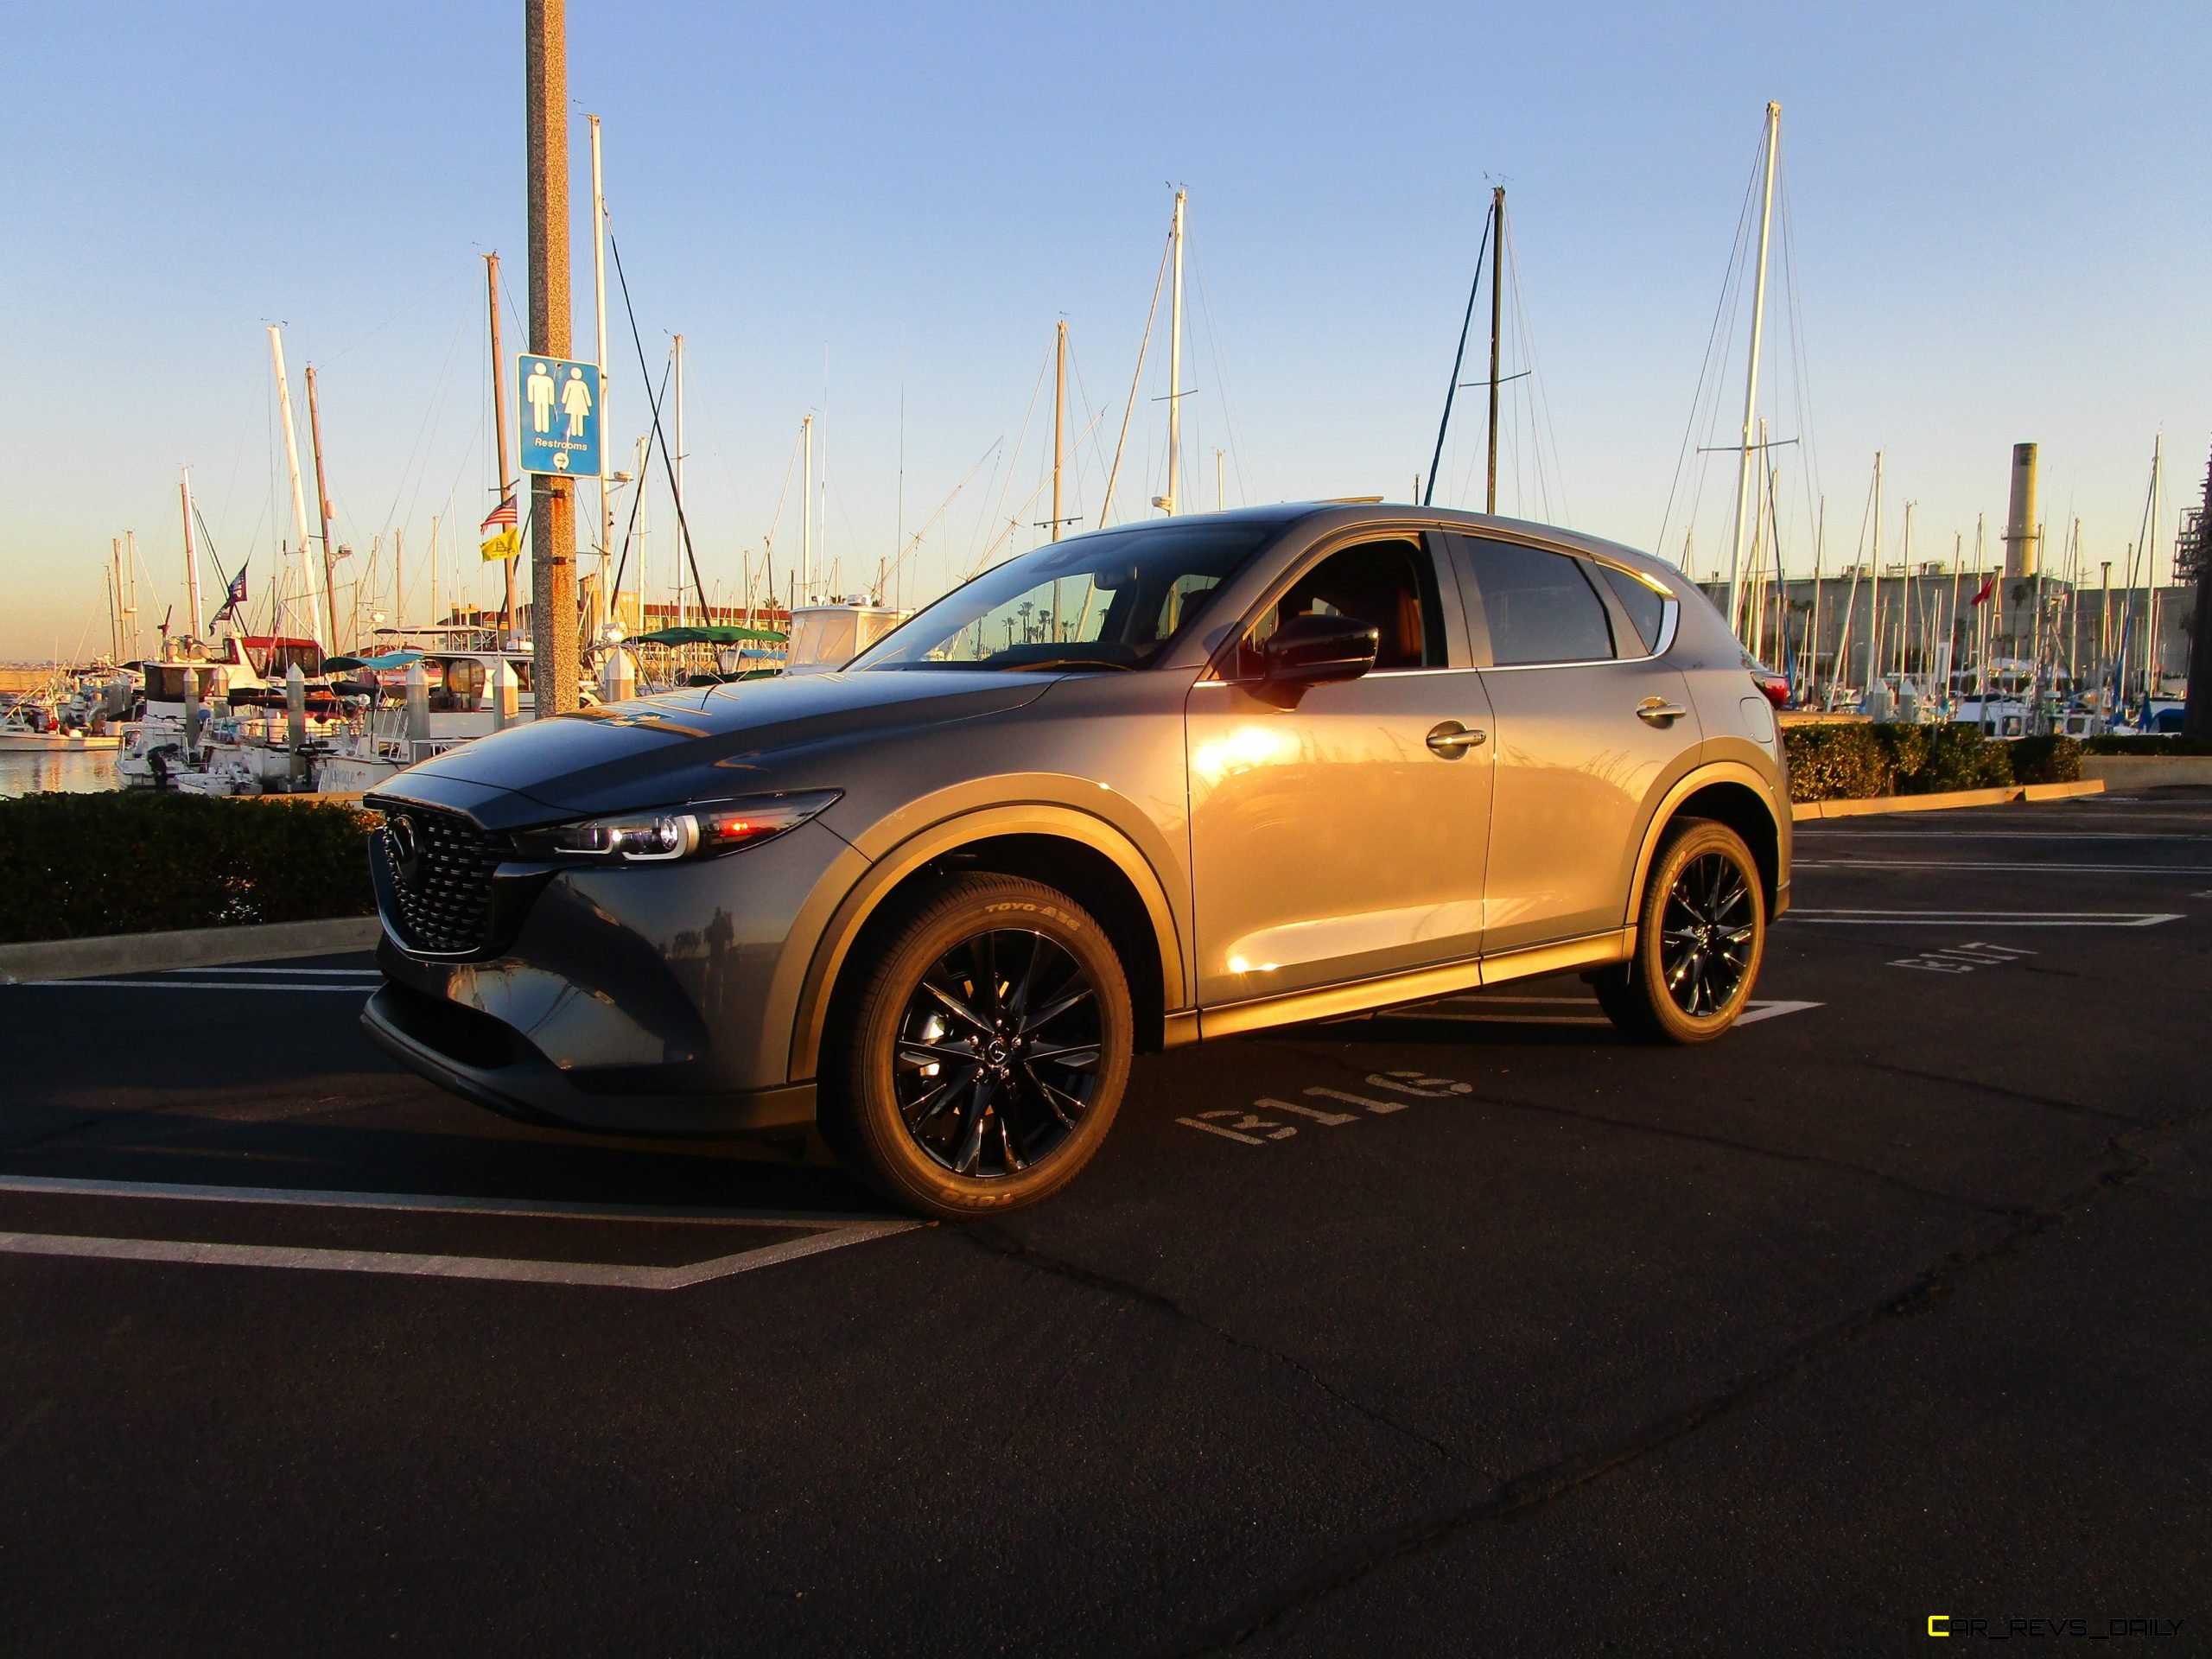 2023 Mazda CX-5 2.5 S AWD Carbon Edition Review by Ben Lewis »